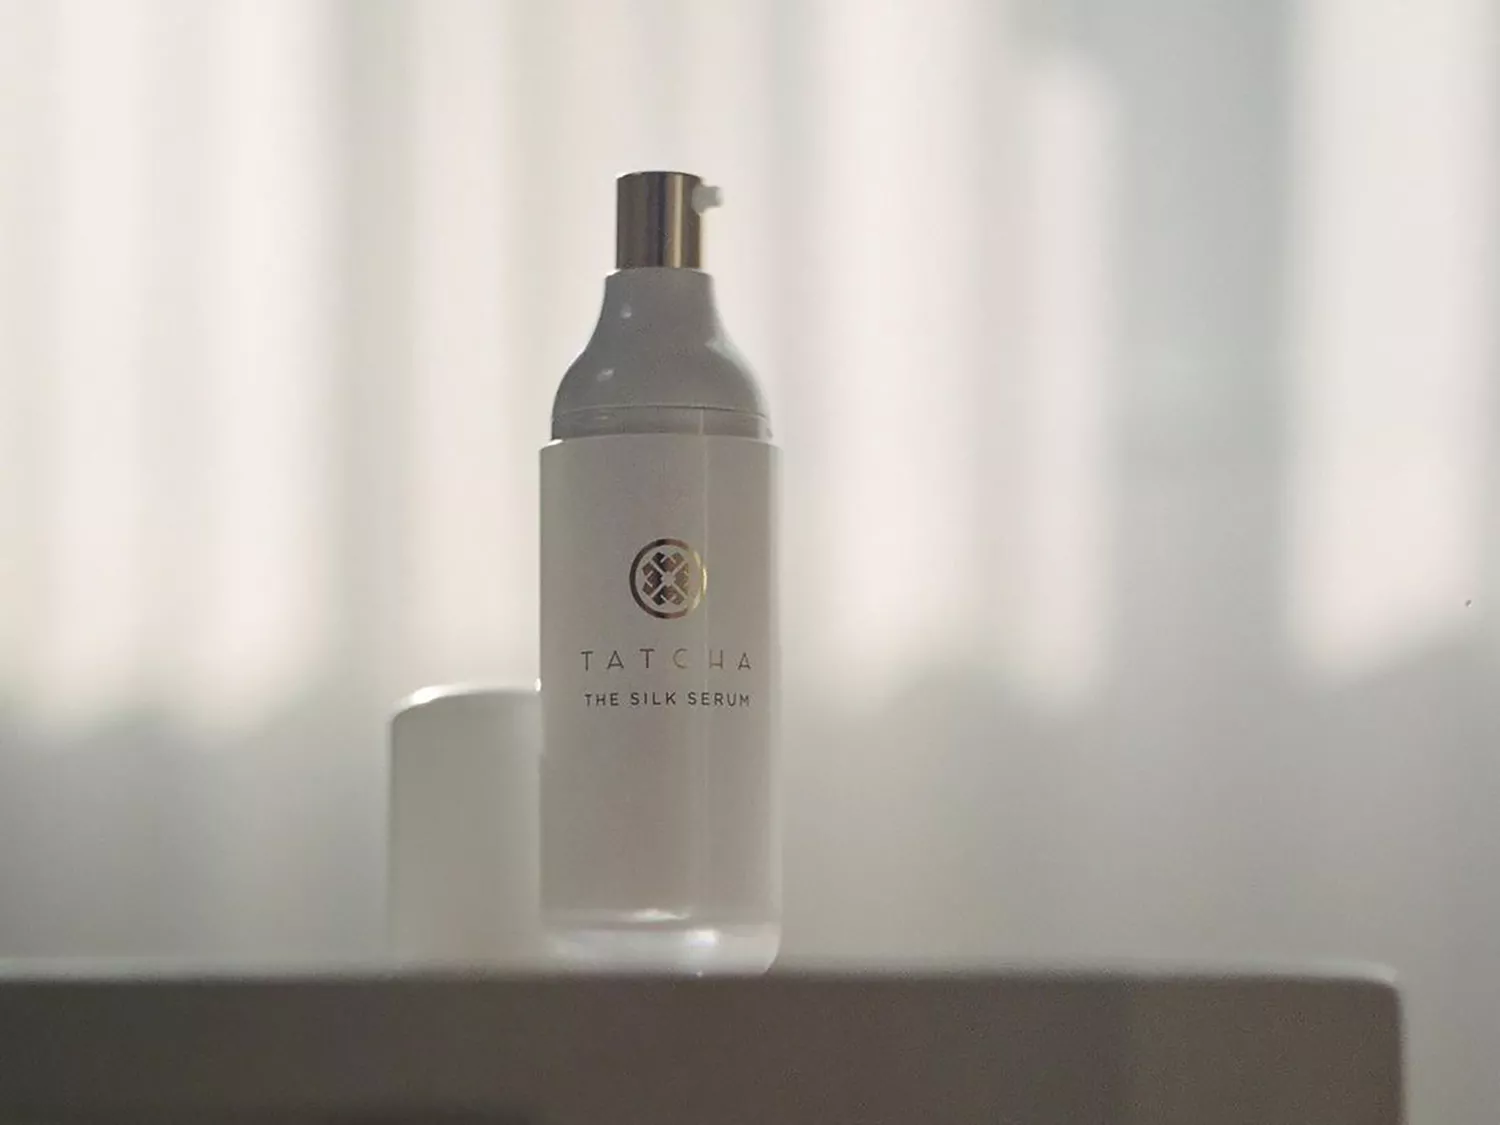 A bottle of Tatcha's The Silk Serum on a table